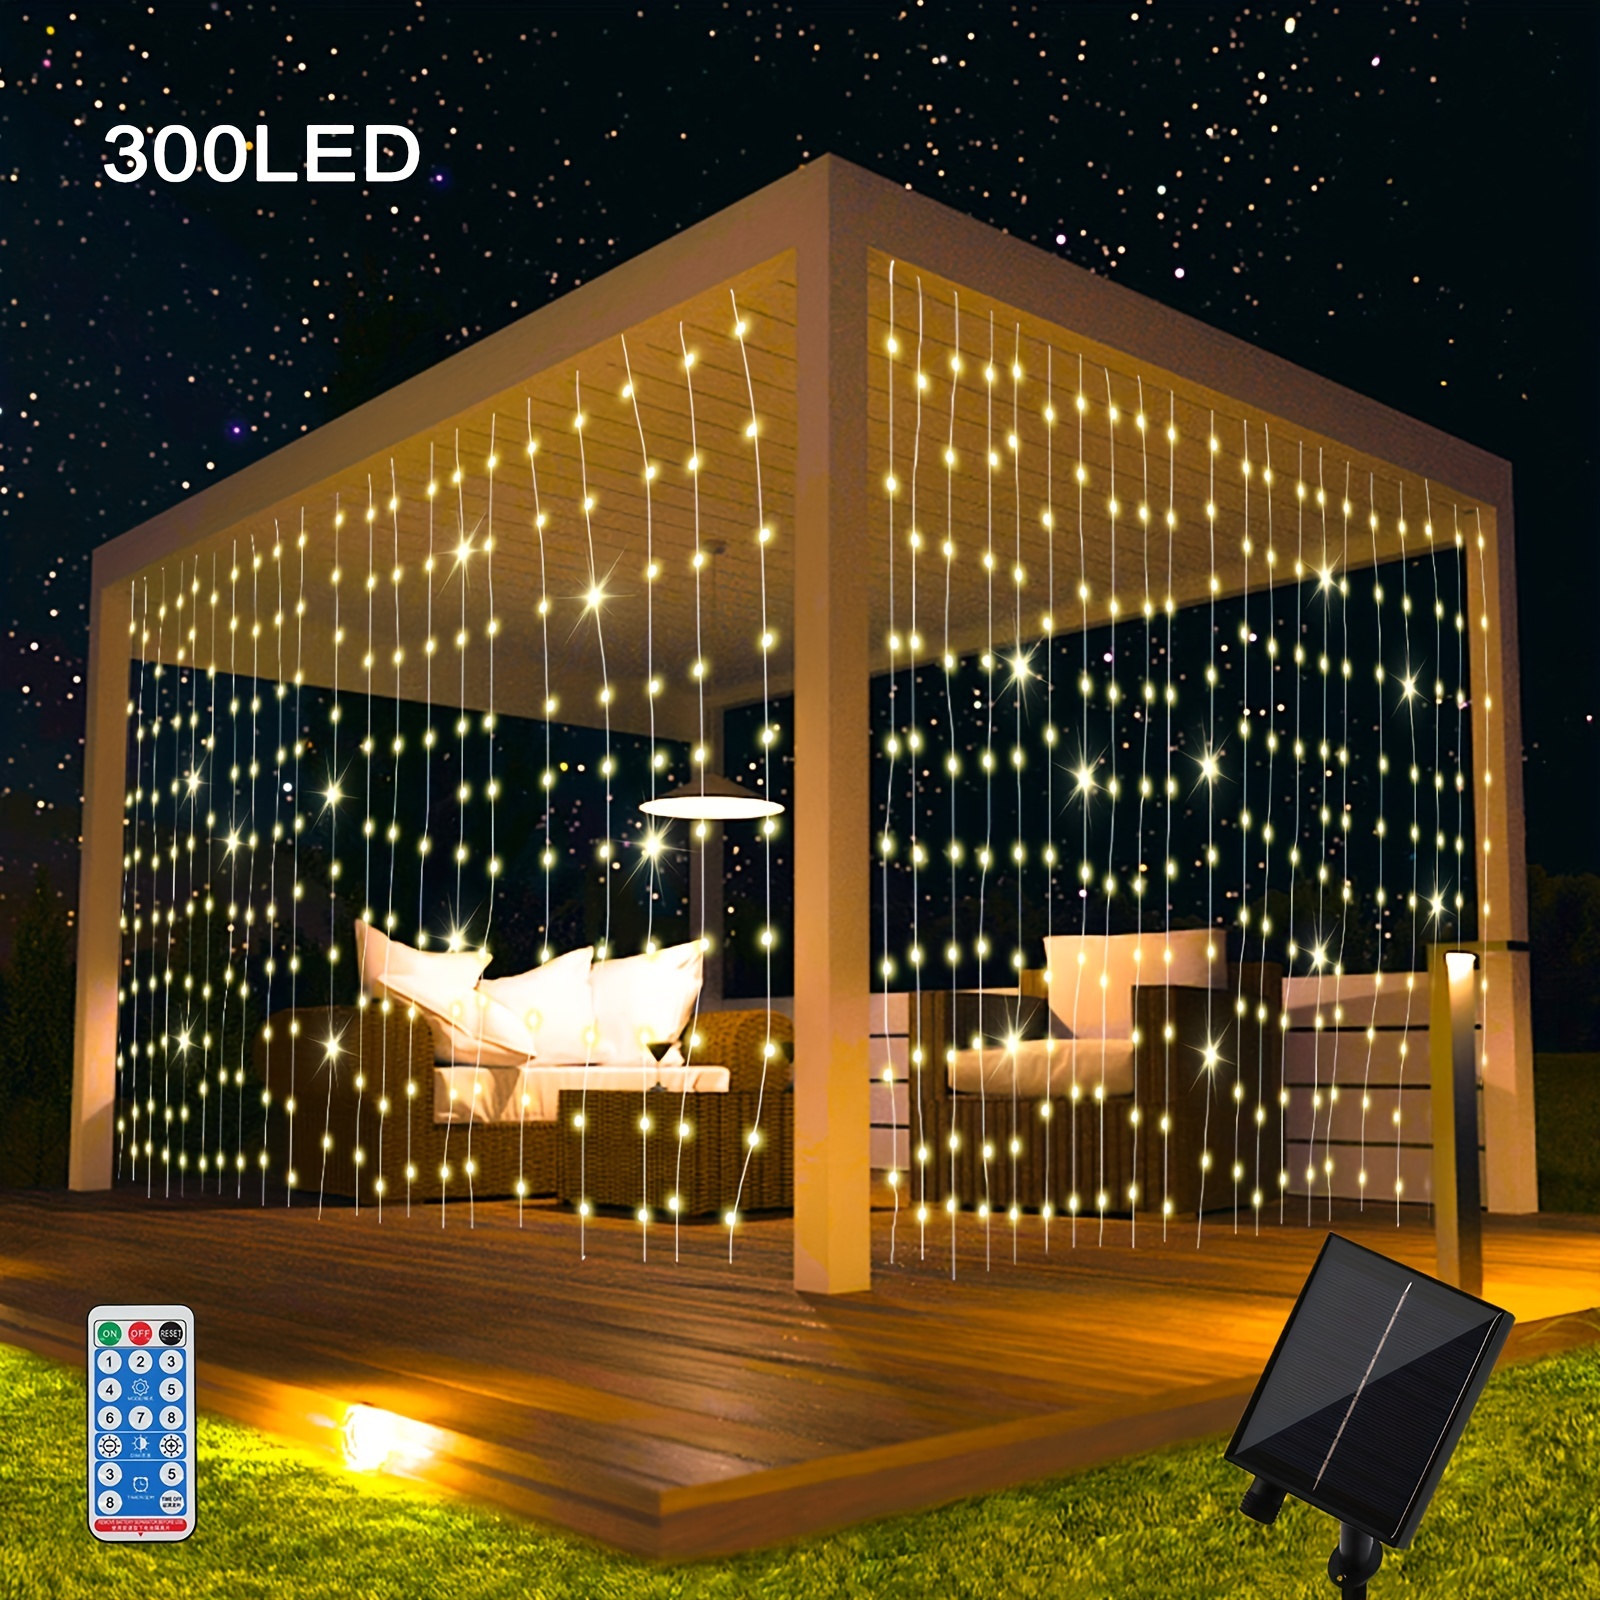 

1pc 300 Leds Solar Curtain Light, Outdoor Remote Control Light, 8 Lighting Modes Fairy Lights Ip65 Waterproof Copper Wire Lights Christmas Party Wedding Home Bedroom Garden Wall Decor, 8.86''x6.56''